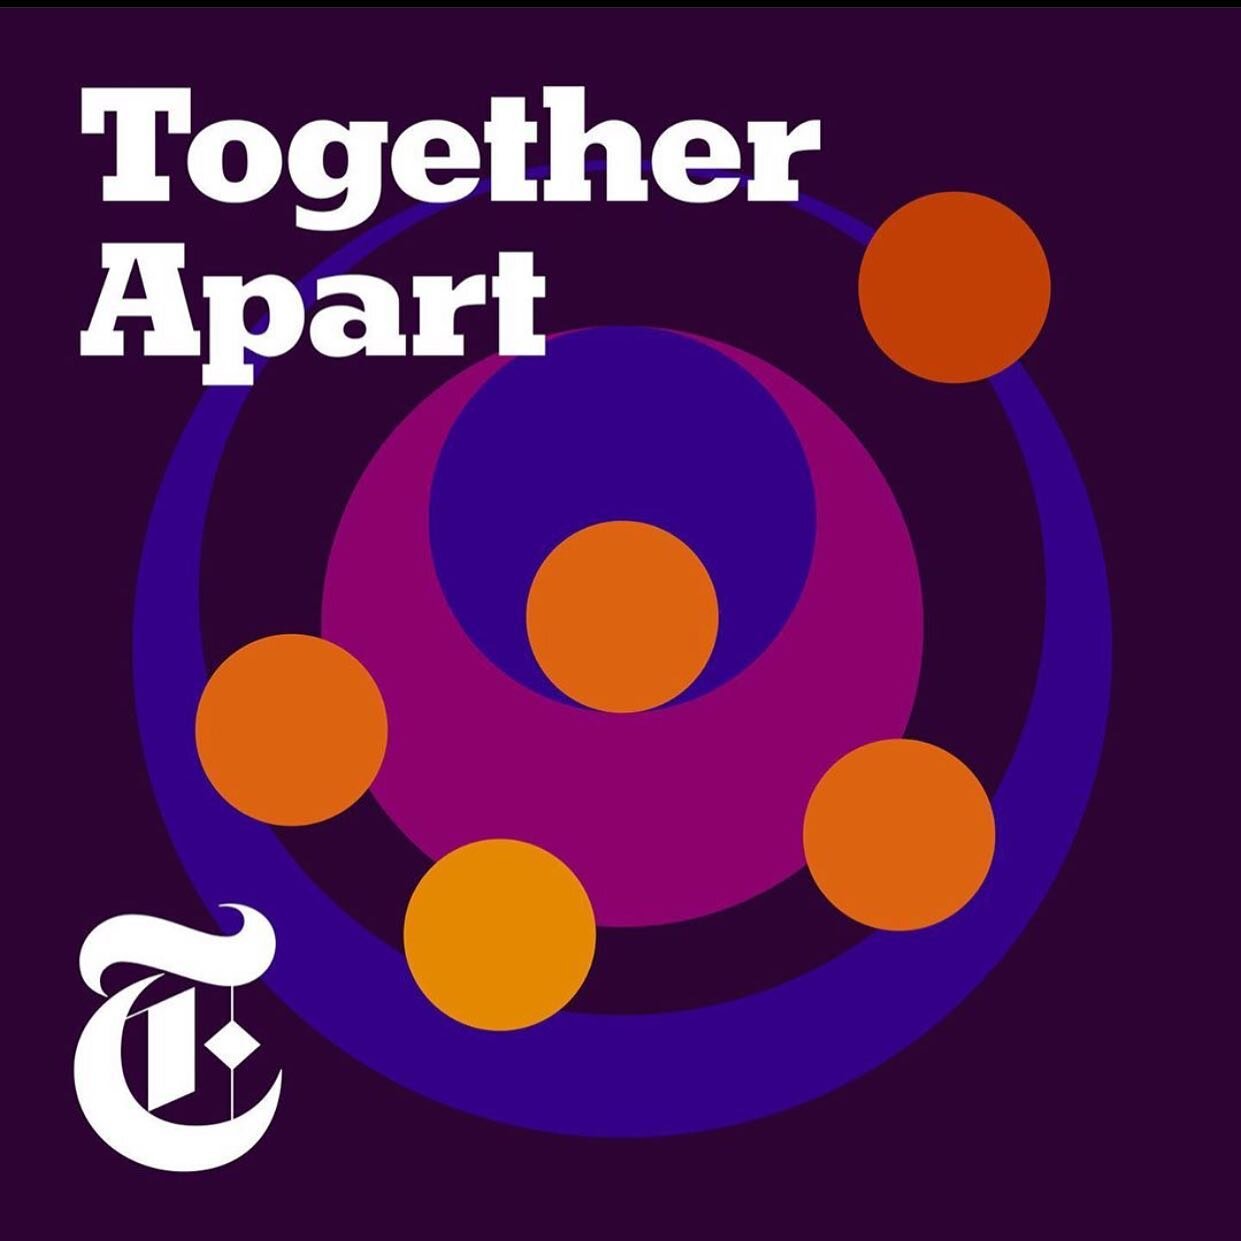 New podcast alert! #togetherapartpodcast from @priyaparker and @nytimes launches today. &ldquo;Each episode explores one person&rsquo;s dilemma as they try to navigate hosting an event that&rsquo;s been upended by Corona. This show will help us all r